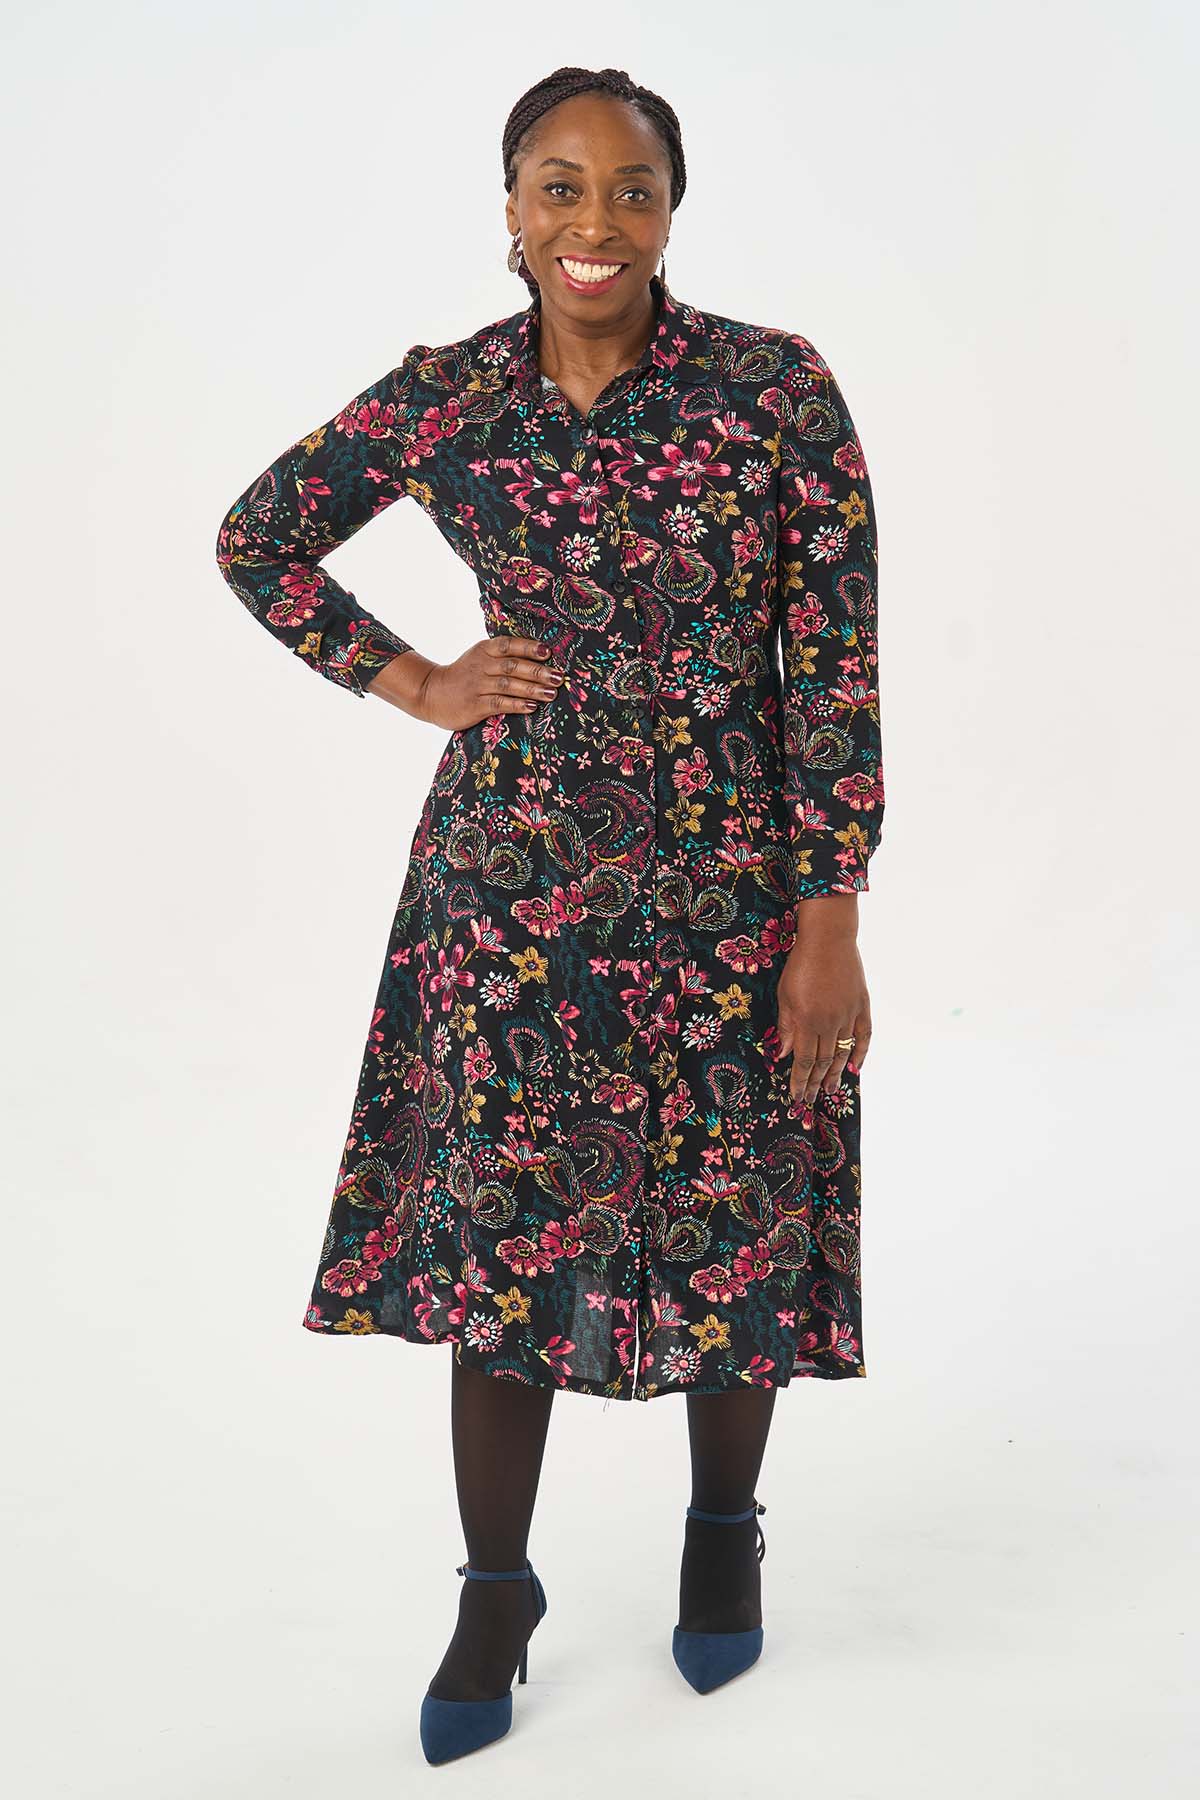 Woman wearing the It Nicole Dress sewing pattern from Sew Over It on The Fold Line. A shirt dress pattern made in cotton poplin, cotton lawn, crepe, viscose or tencel fabrics, featuring a buttoned front, collar and collar stand, midi A-line skirt with gen